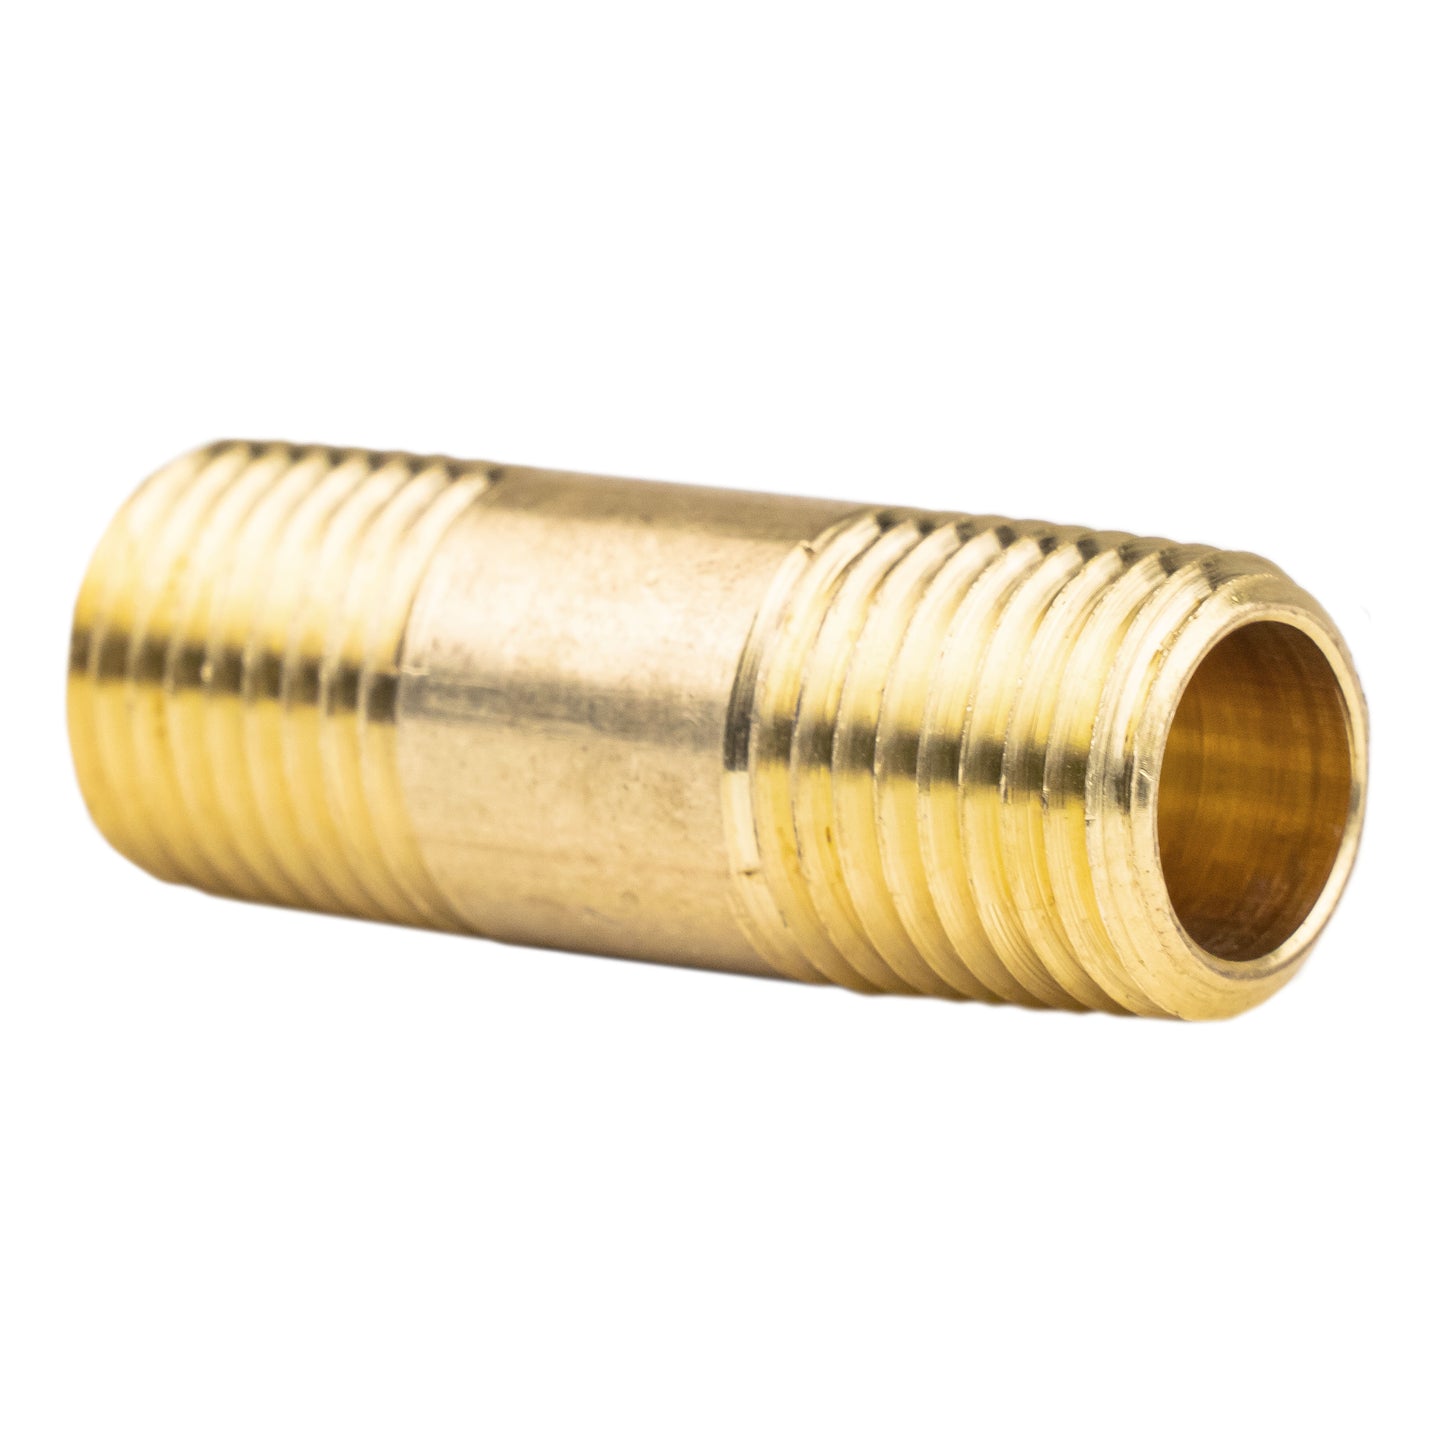 1/4" NPT x 1.5" Long Male Pipe Nipples Threaded Brass Fittings Connectors 5 Pack